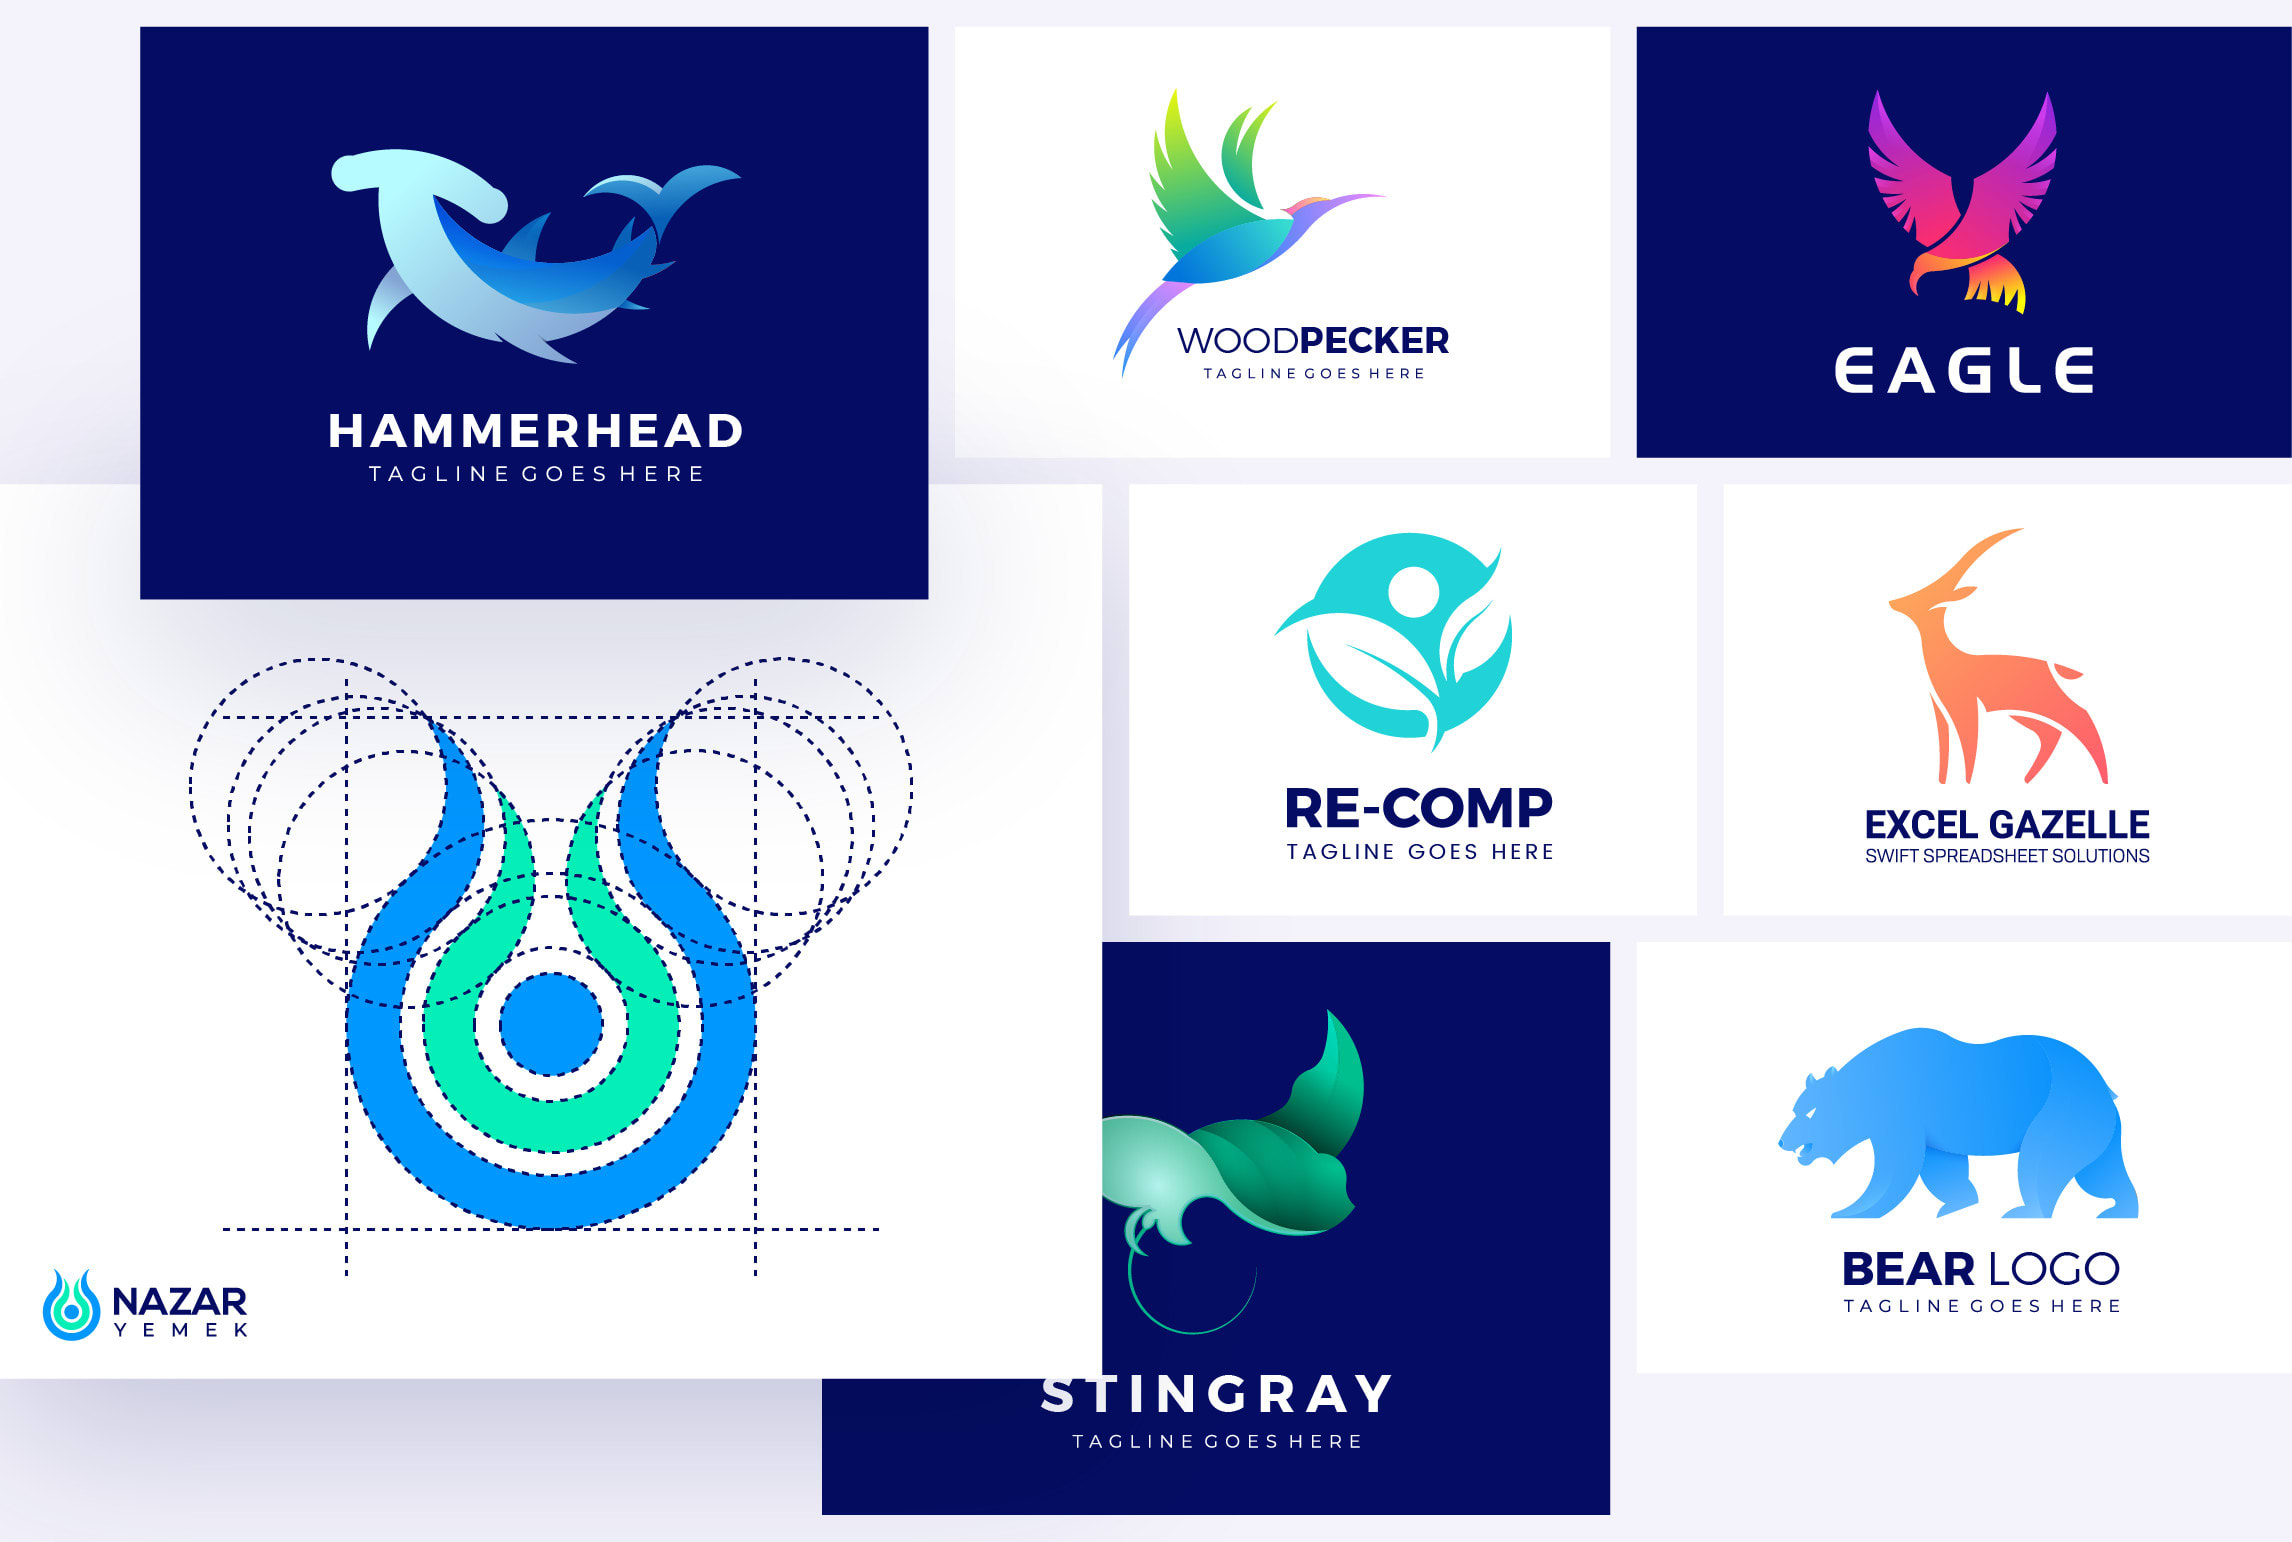 Design A Professional Logo Using Golden Ratio By Omitdatta Fiverr